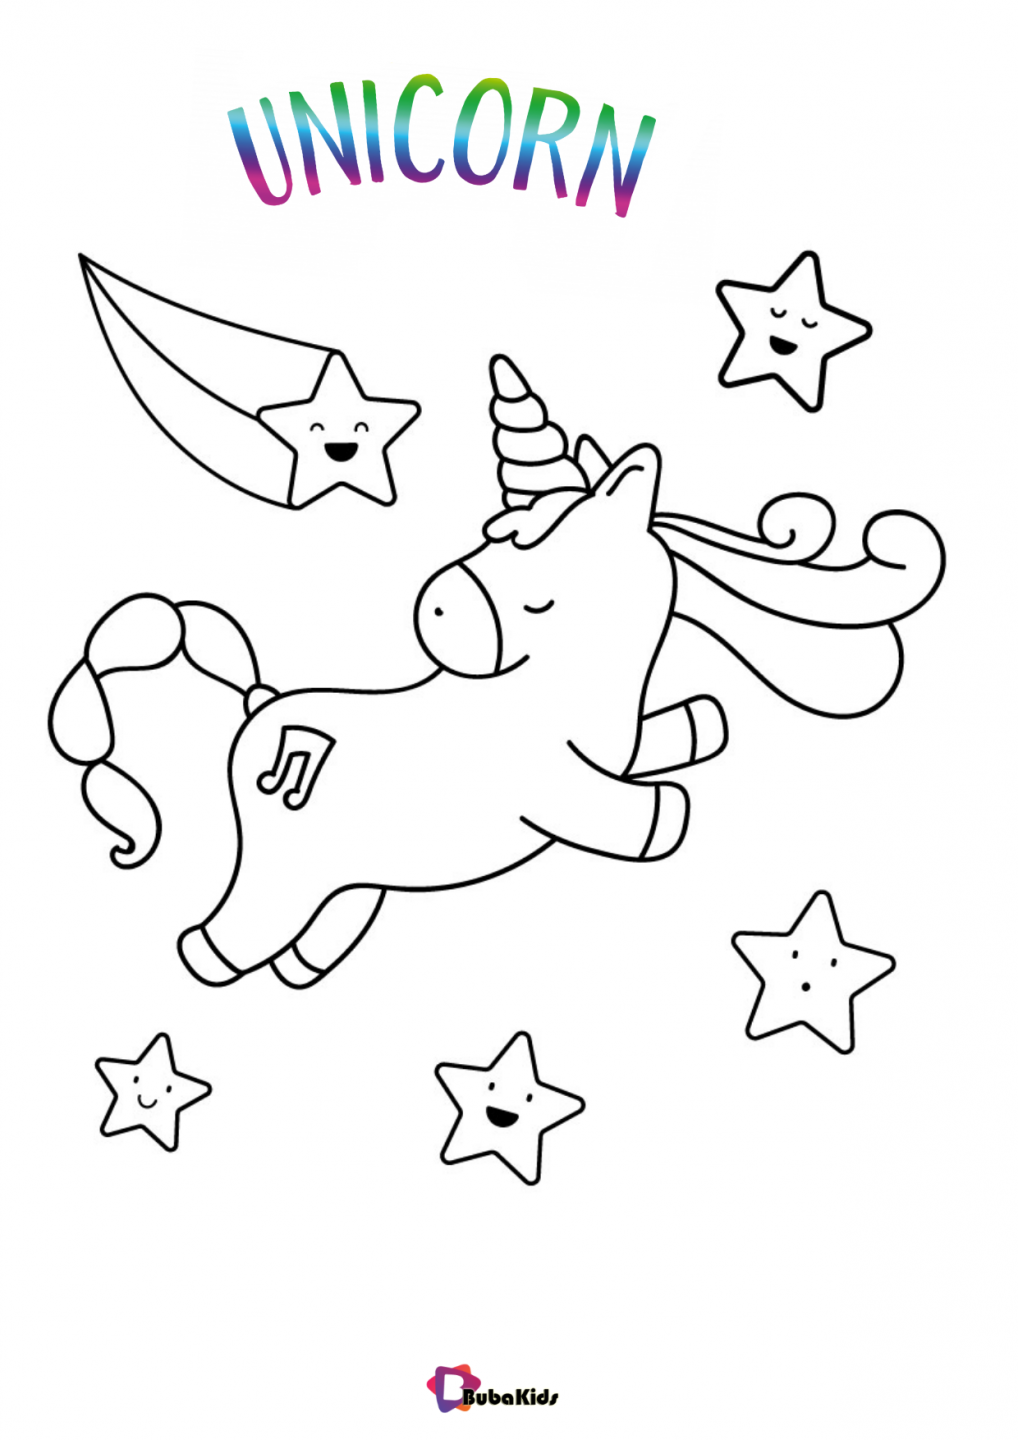 Download Flying unicorn with stars coloring pages - BubaKids.com